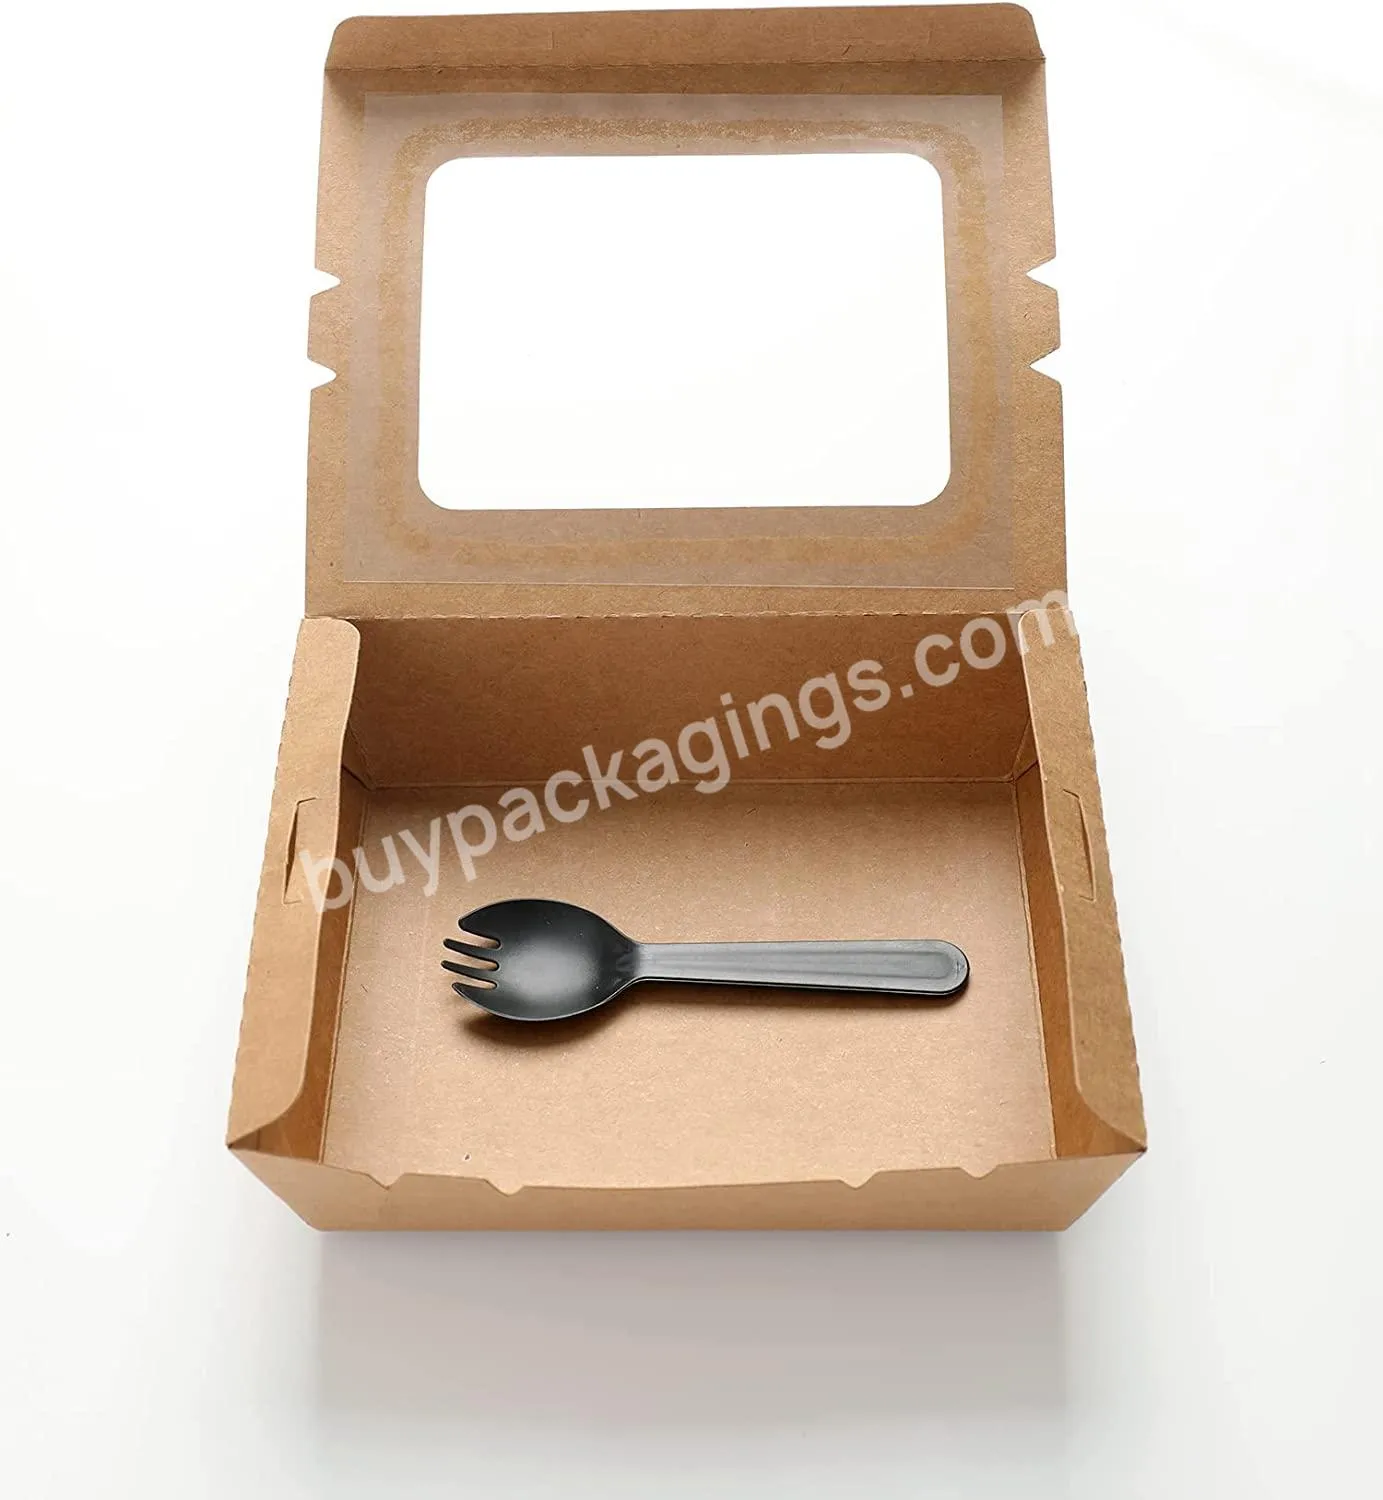 Take Out Disposable Food Containers,Kraft Brown Food Boxes,With Individually Packaged Forks - Buy Takeaway Packaging Box,Disposable Boxes For Food,Disposable Food Containers.